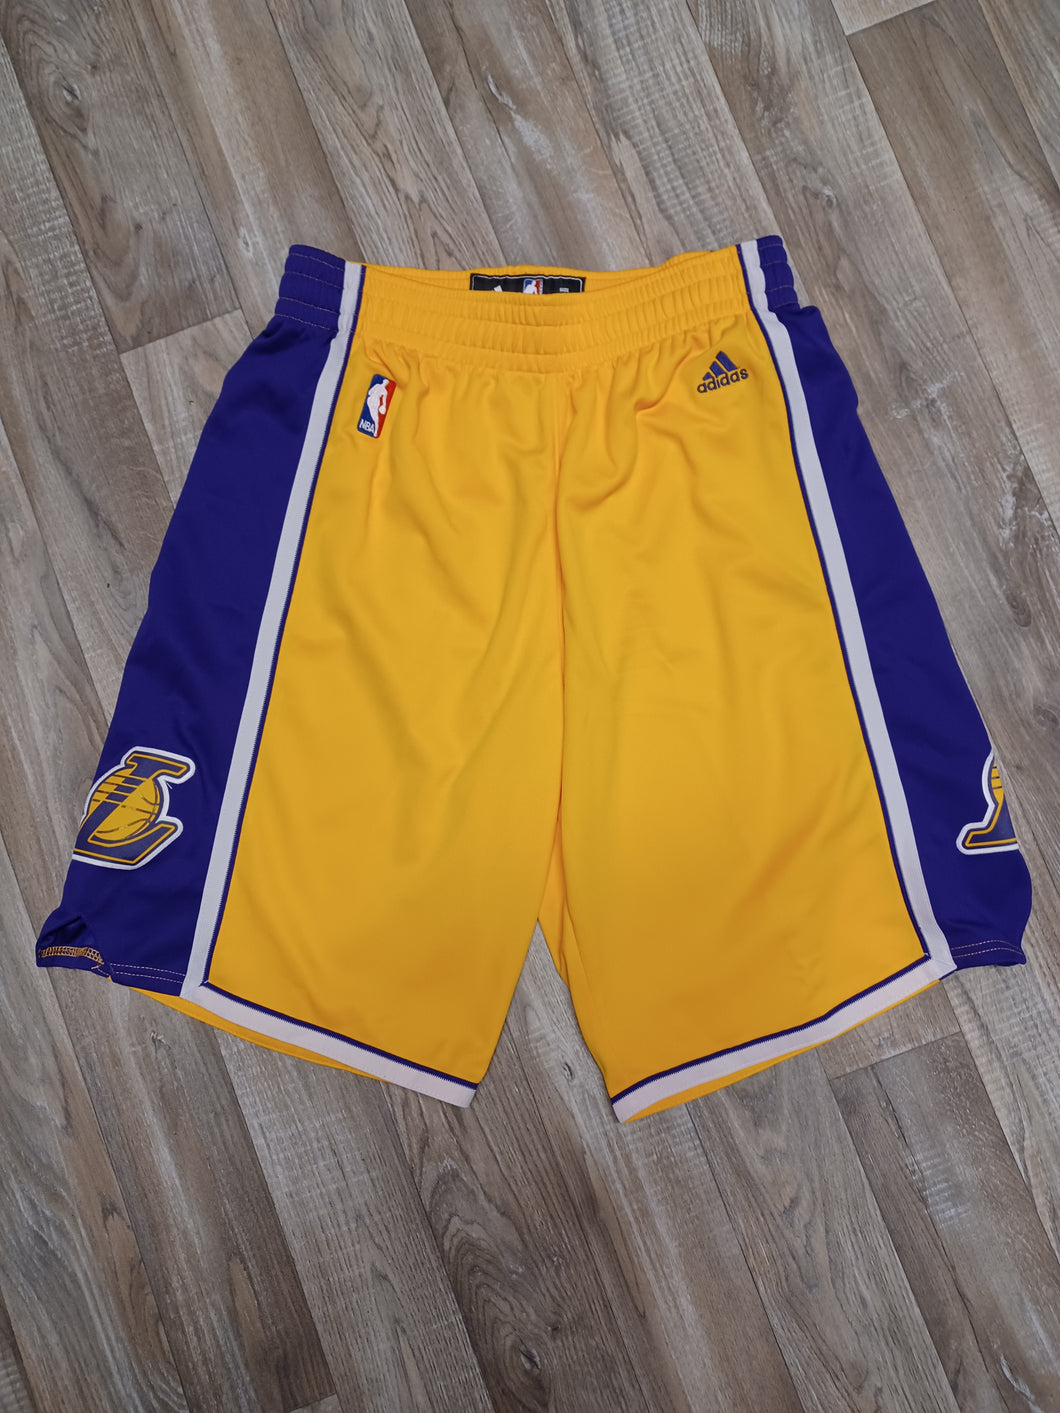 Los Angeles Lakers Shorts Size Large